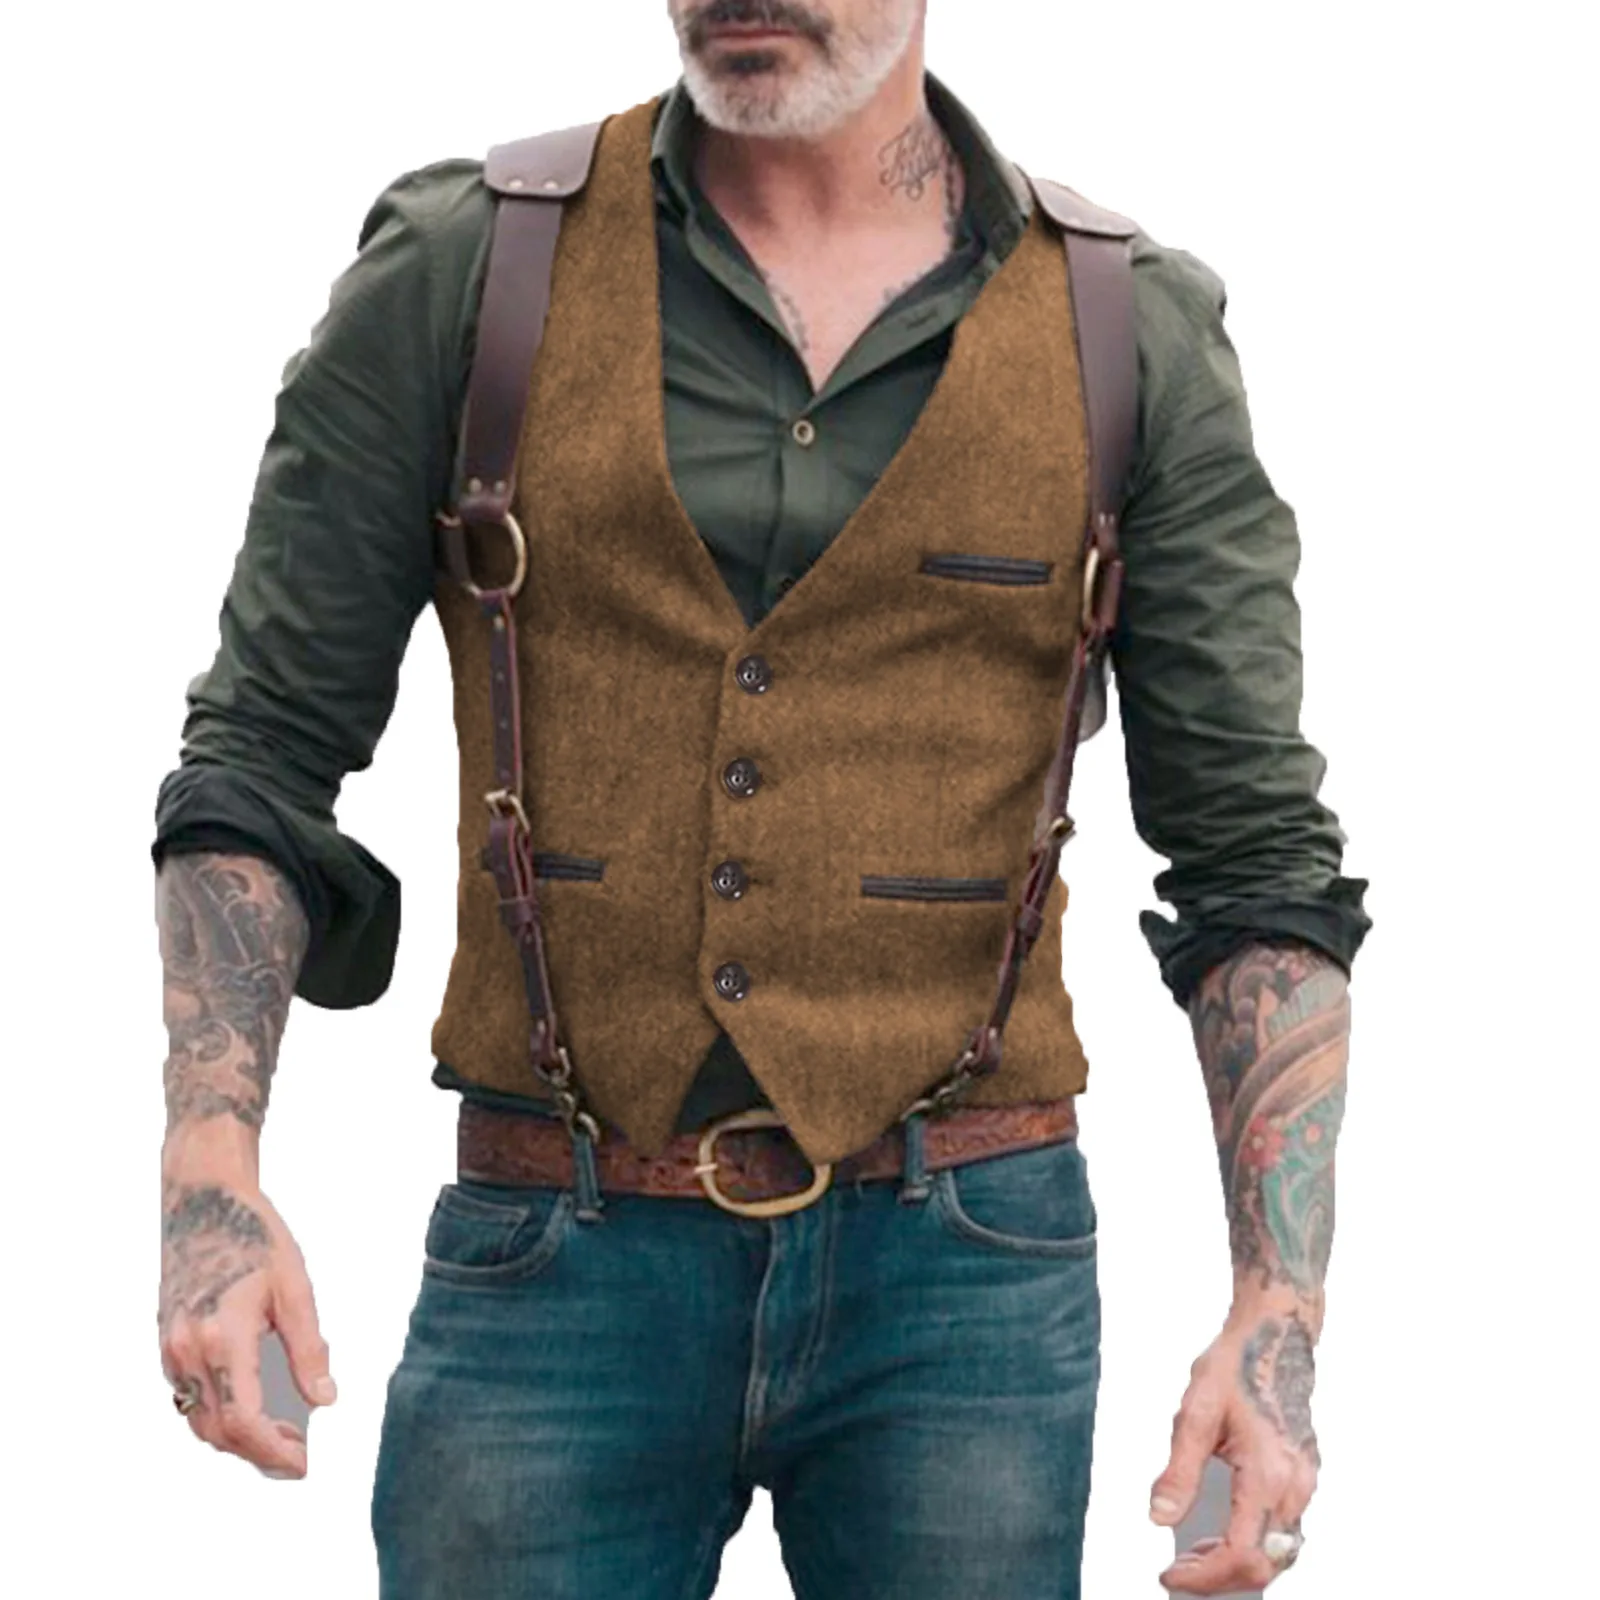 

V-Stripe Men's Suit Vest Vintage Fashion Punk Style Tank Top Victorian Style Cosplay Costumes Business Office Waistcoat